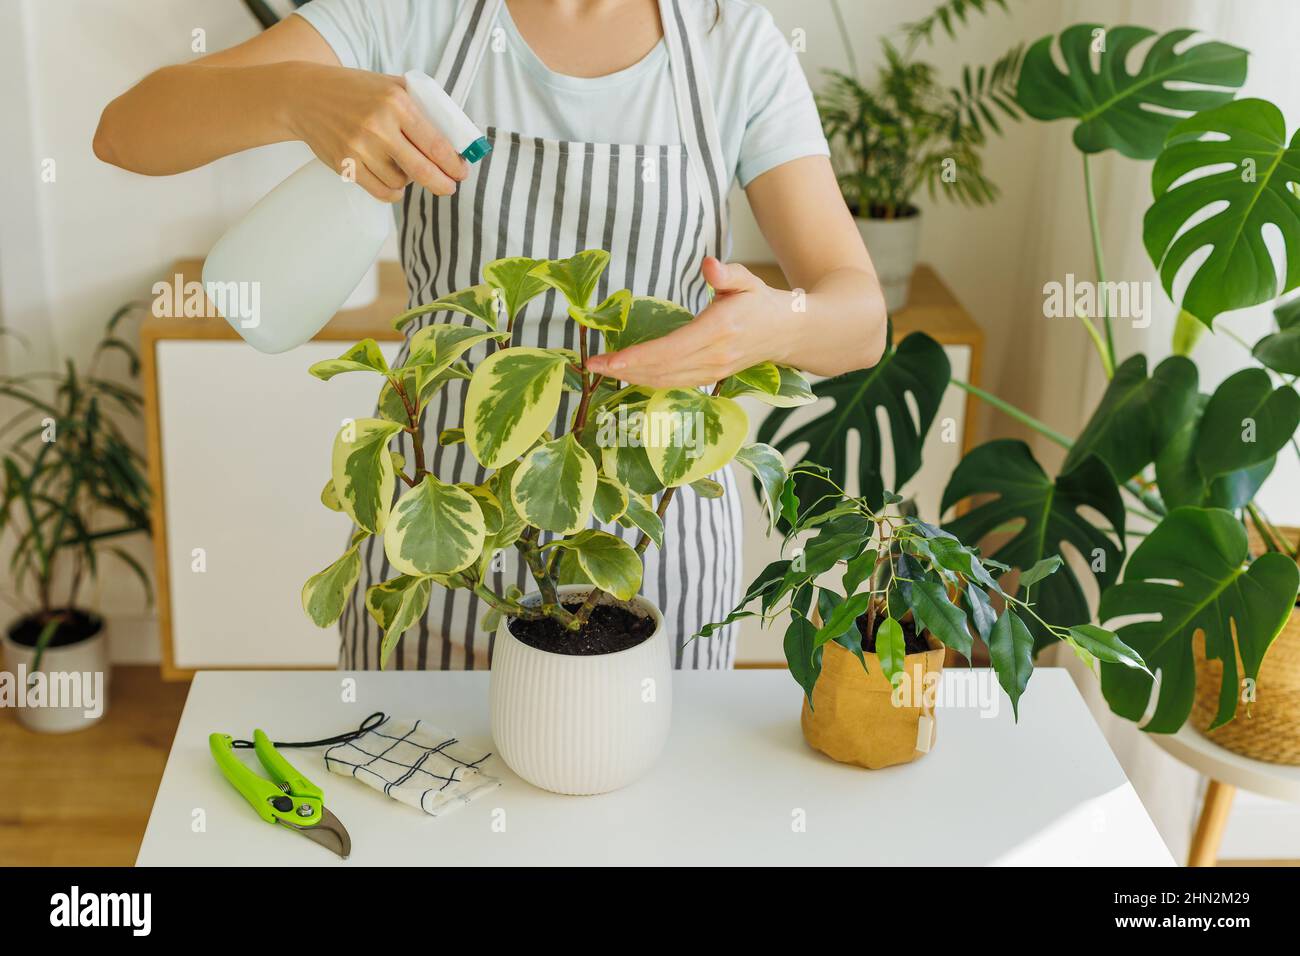 Woman in apron spraying houseplants at home. Springtime to care and watering plants. Florist with spray bottle in hands. Concept of gardening, hobby, householding. Stock Photo